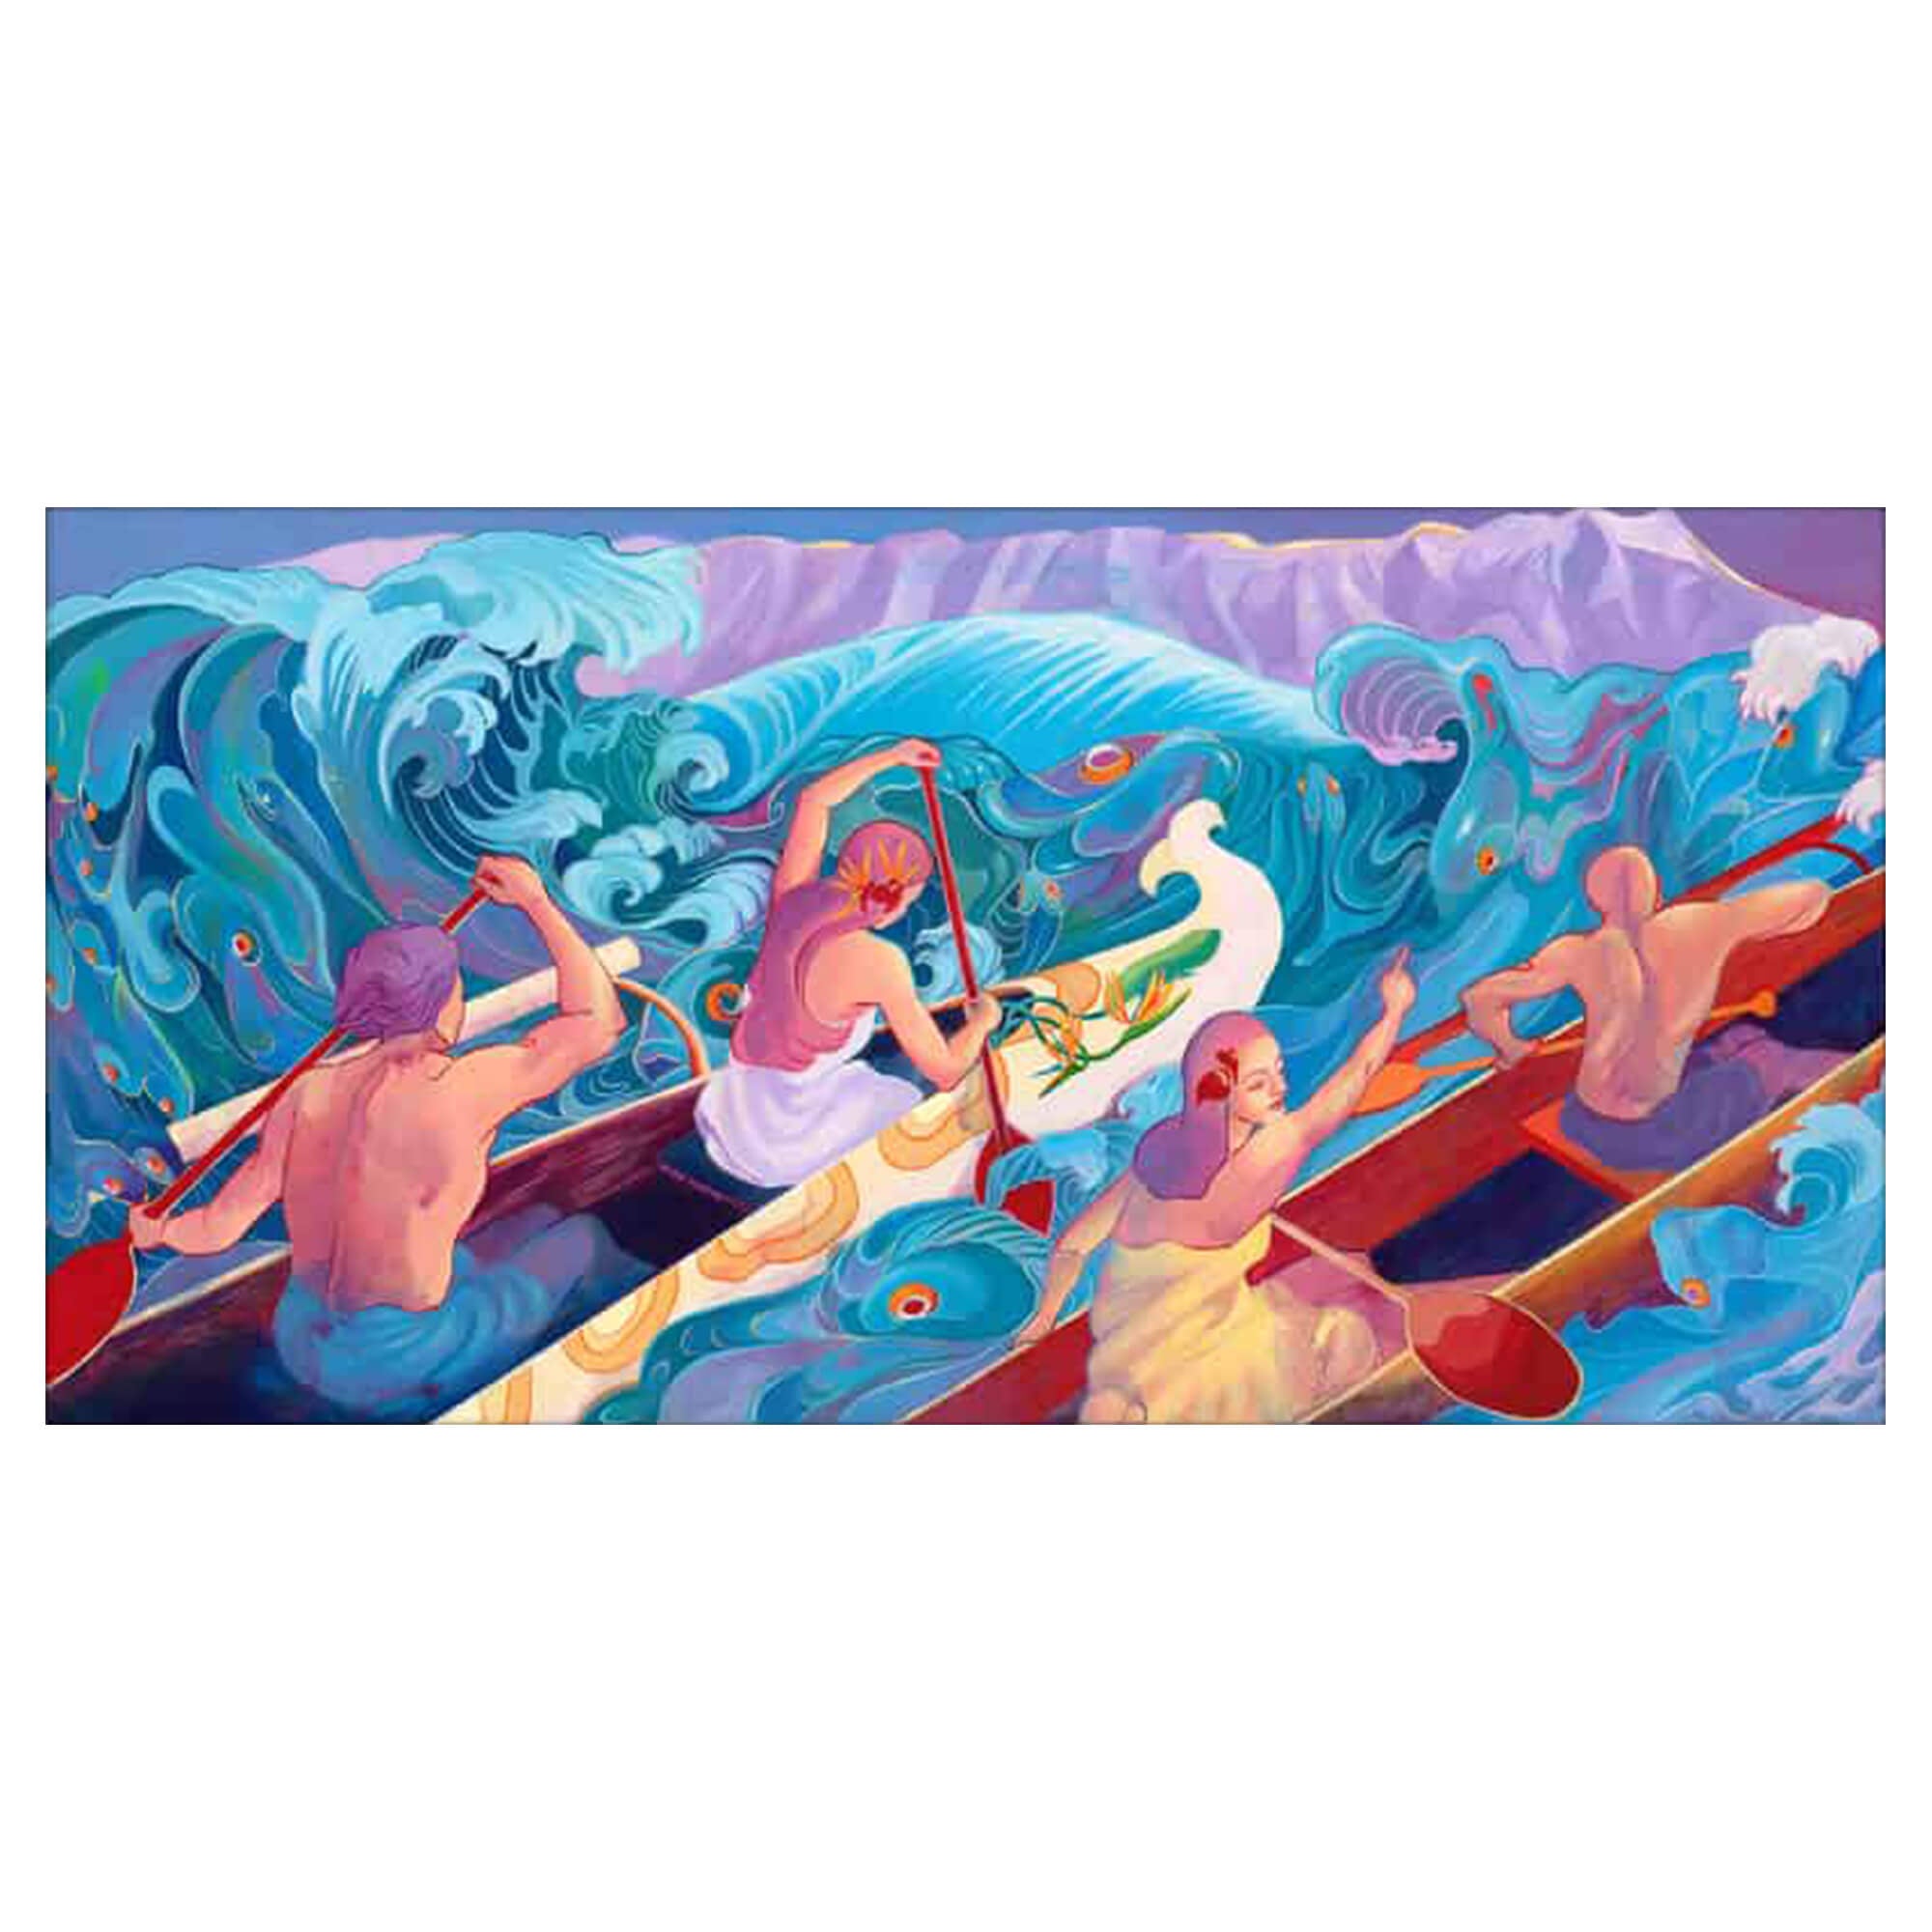 A matted art print of people on outrigger canoes battling Hawaiian big waves by Hawaii artist Mae Waite